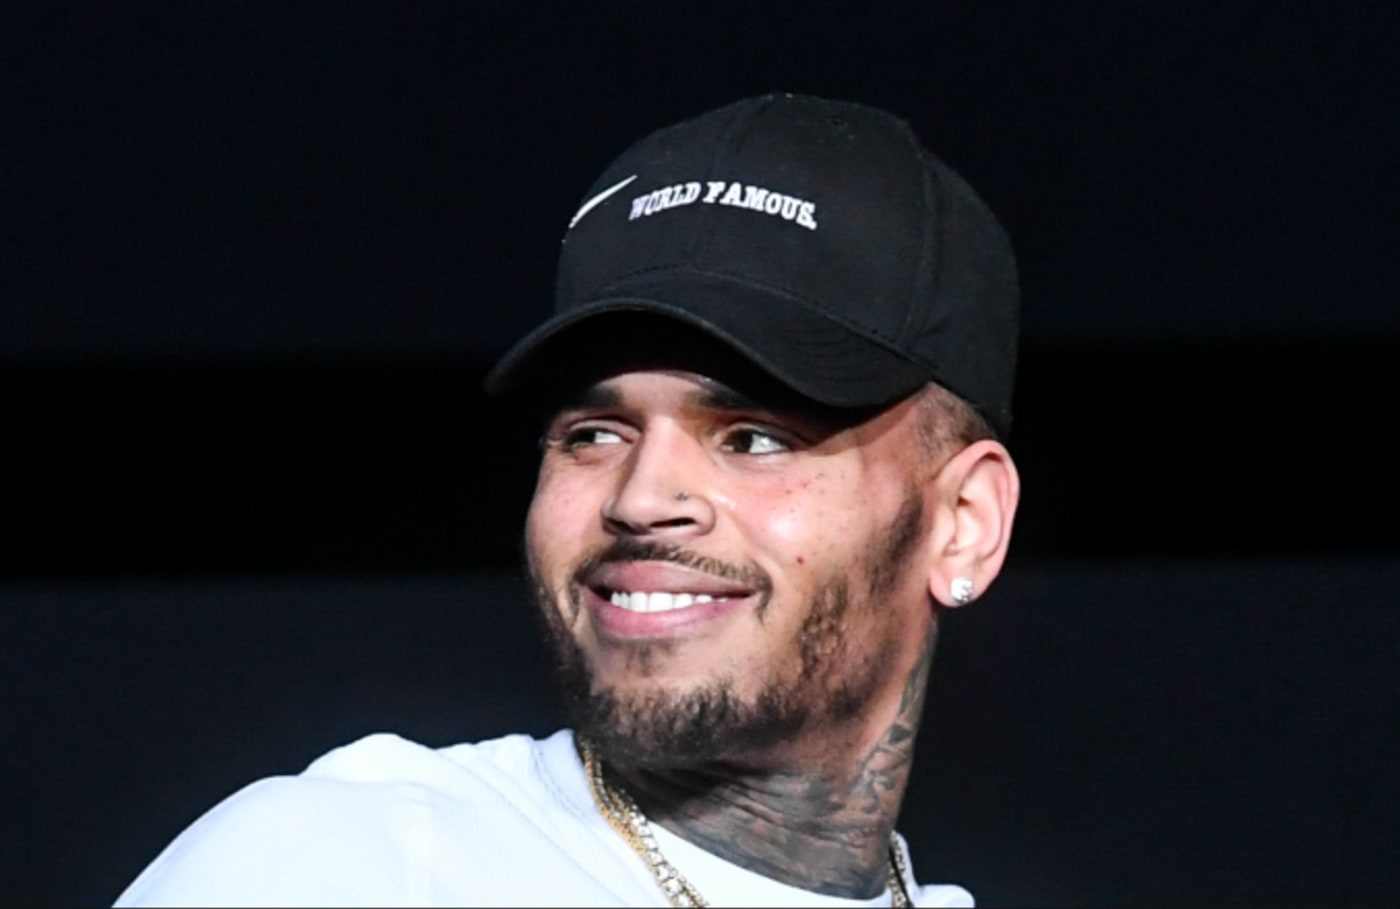 Chris Brown performs onstage at 3rd Annual V 103 Winterfest Concert